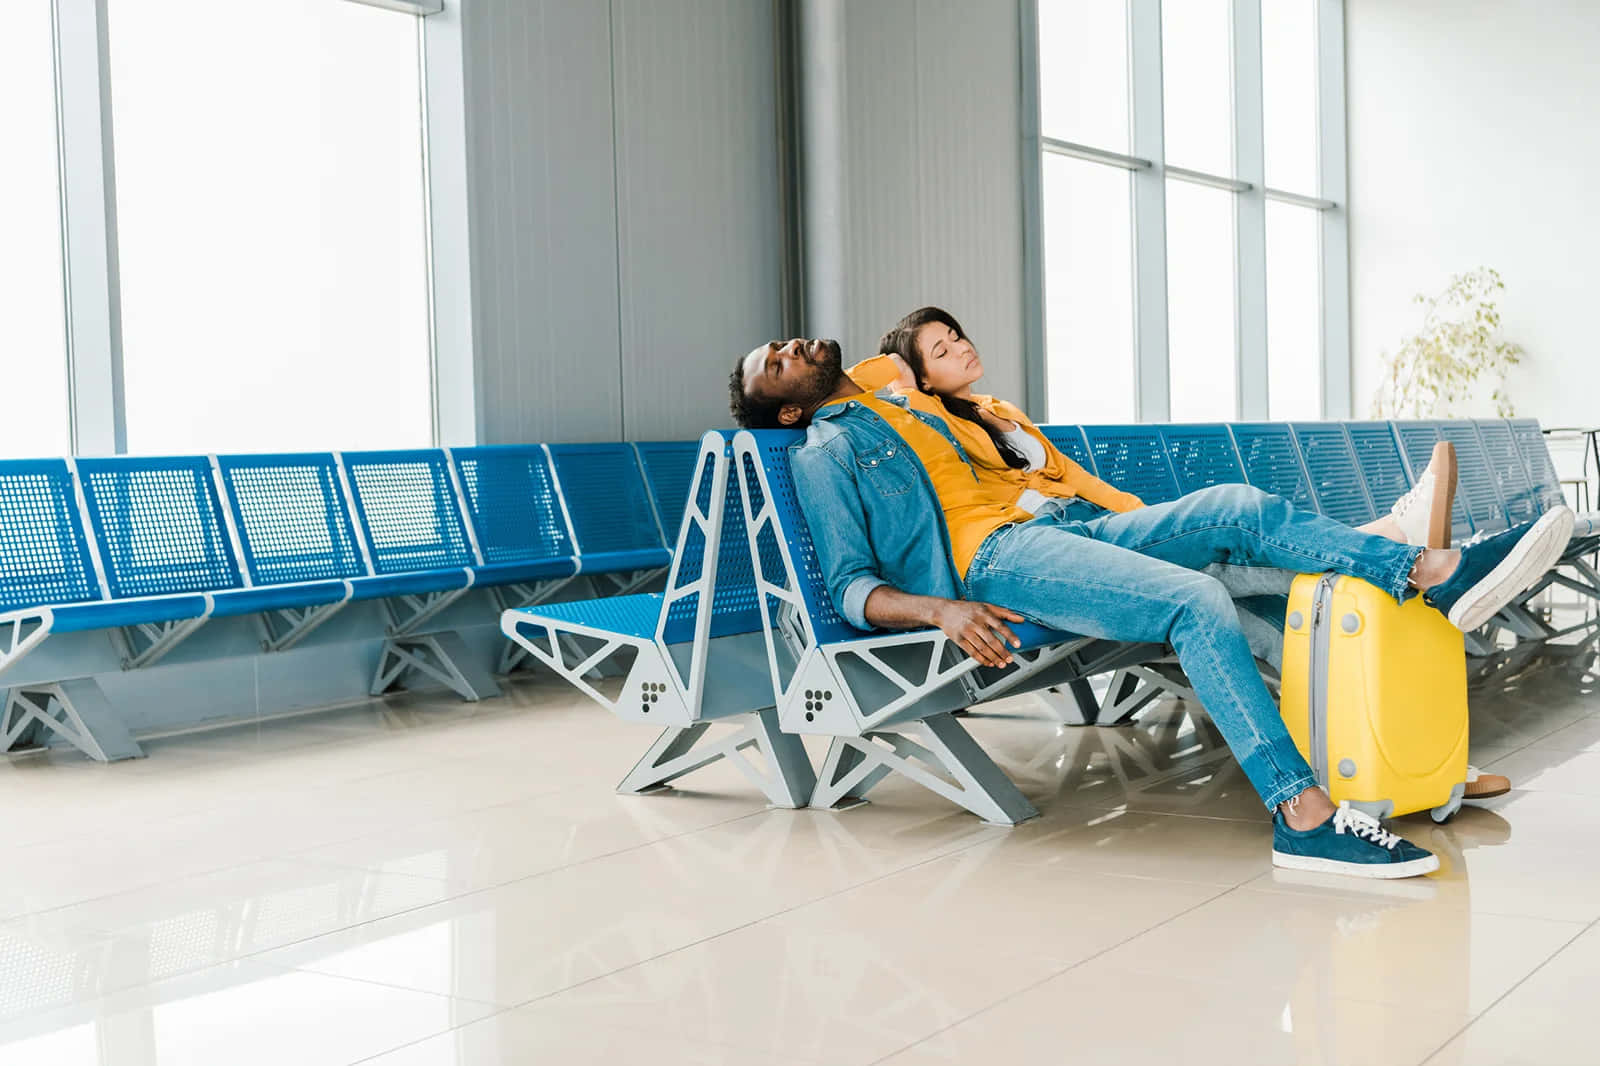 Two People Sitting On A Bench In An Airport